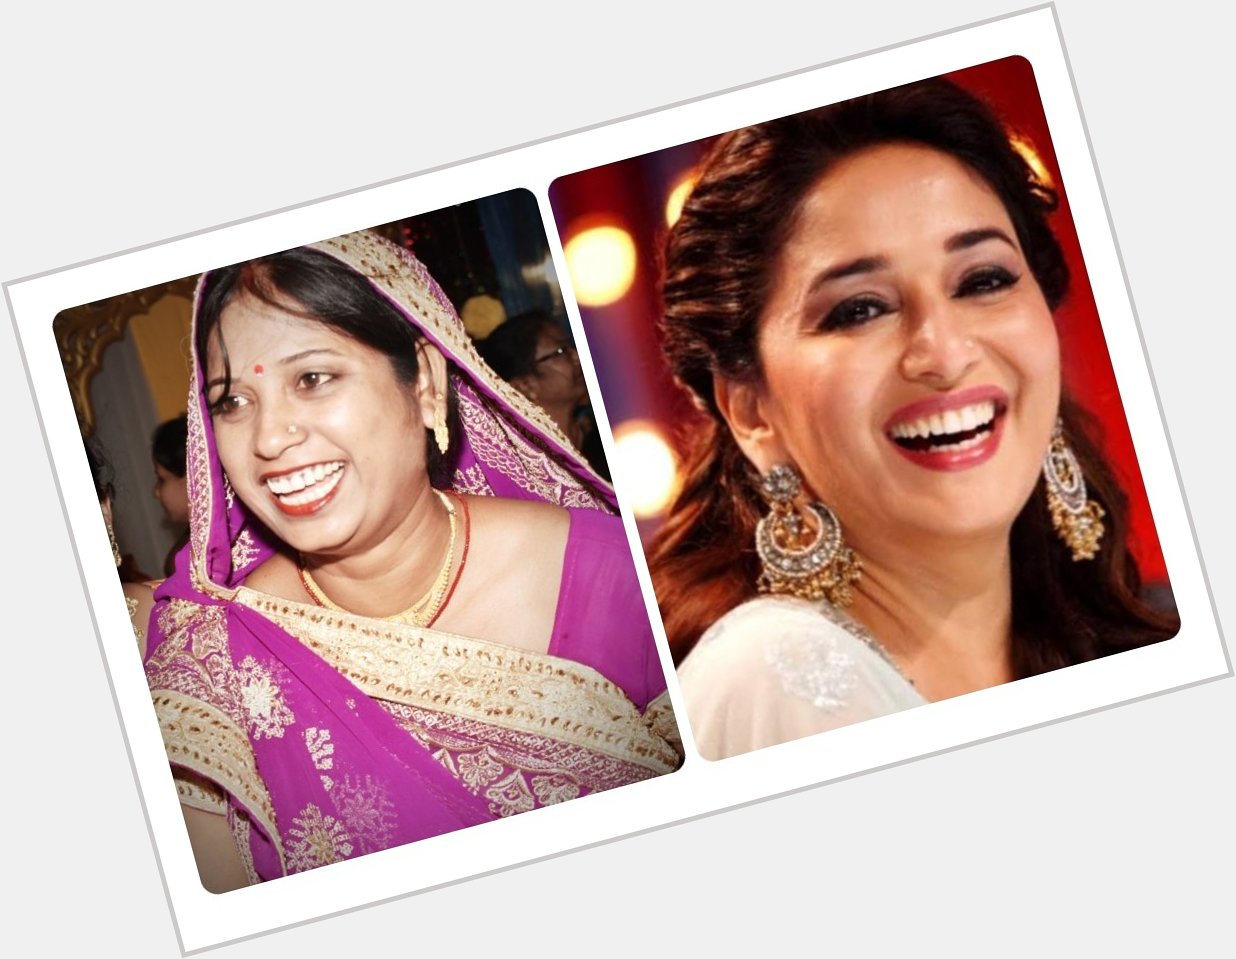  Happy Birthday Smiling Faces: My Life Partner and Madhuri Dixit!! 